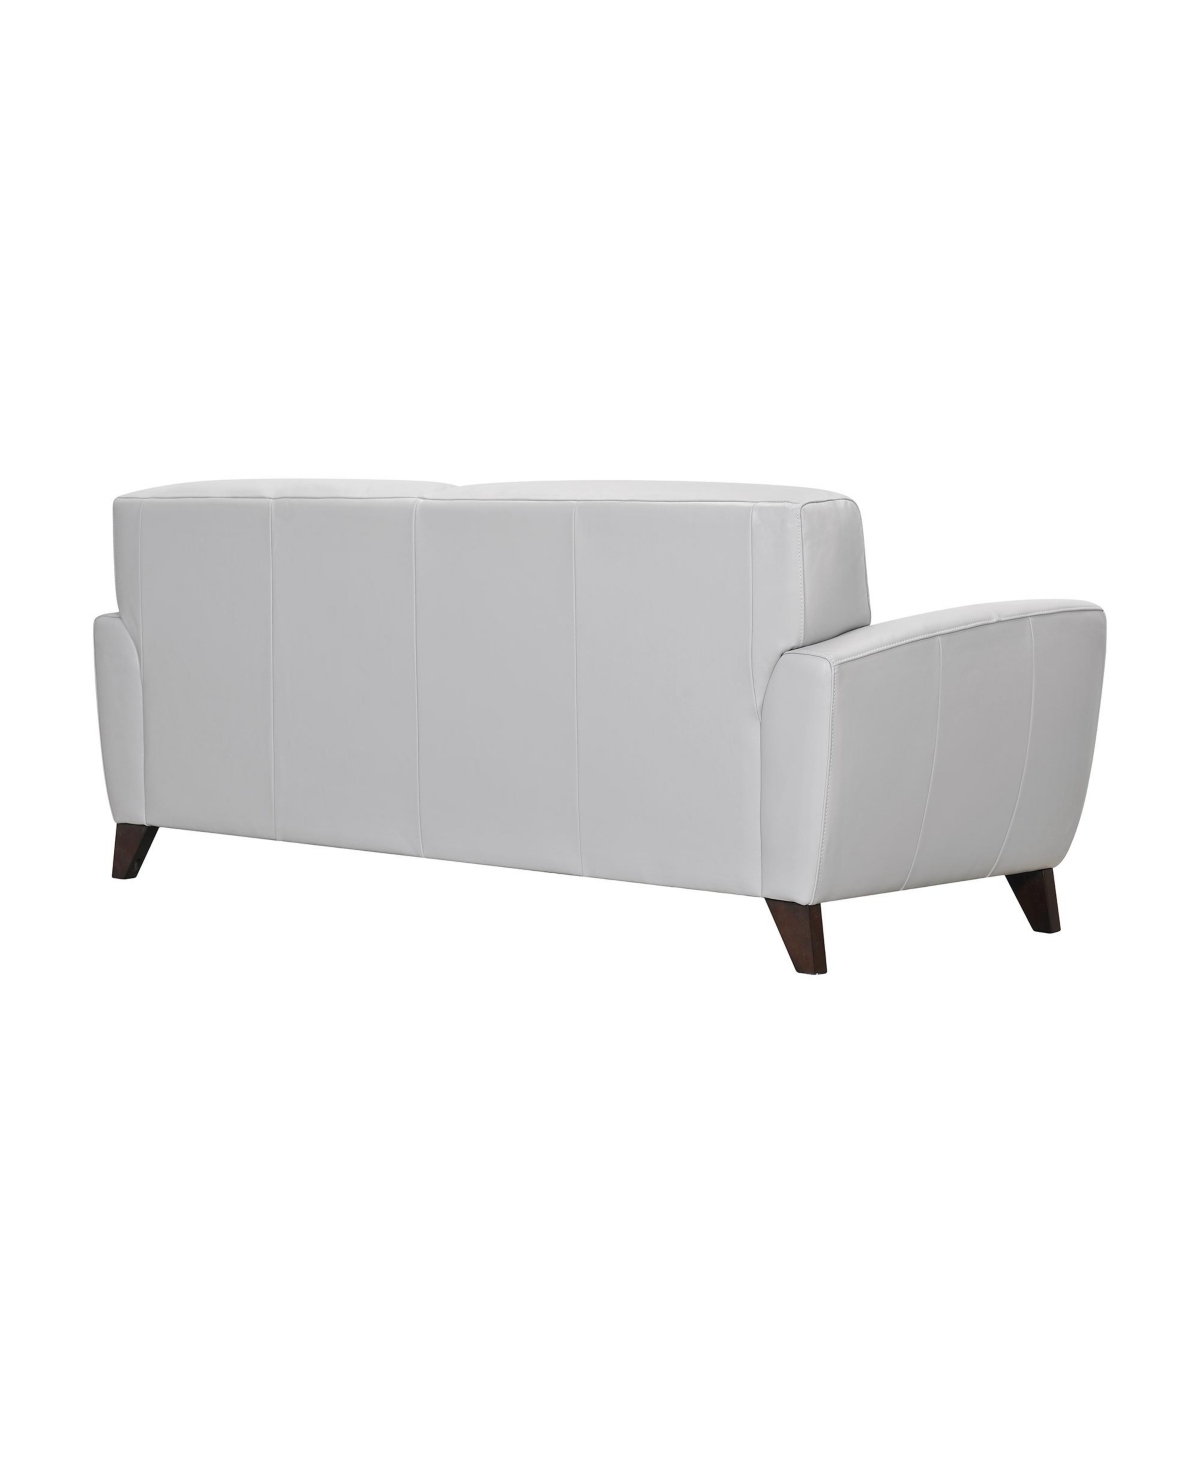 Shop Armen Living Jedd 82" Genuine Leather With Wood Legs In Contemporary Sofa In Dove Gray